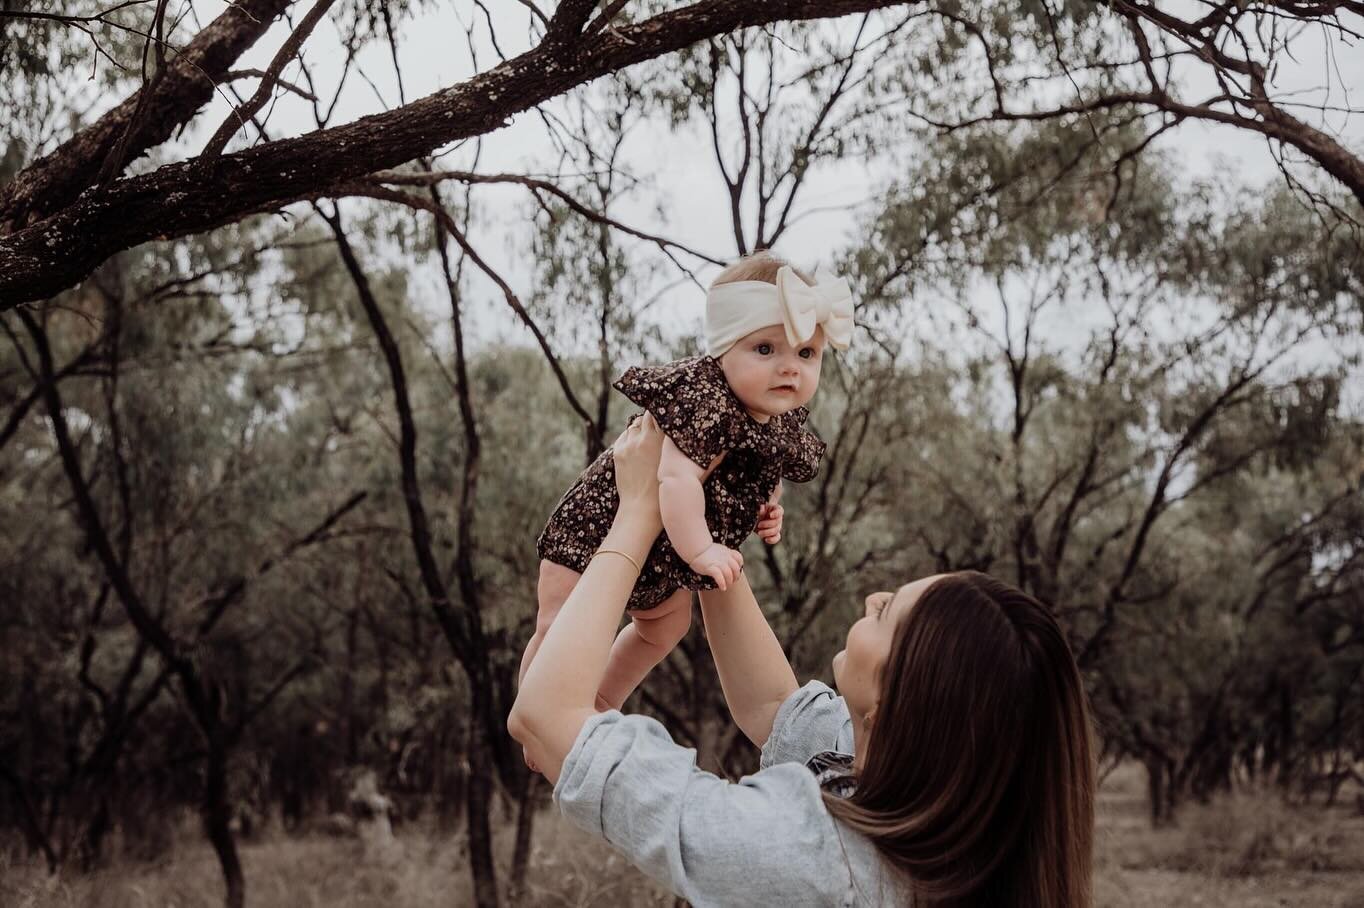 oh meee gosh! This family is soo sweet!  I had the pleasure of capturing little moments for them! Last time I photographed Lottie she was 6 weeks old!! Now she&rsquo;s 5 months! The sweetest little family.

Thank you for entrusting me with your memor